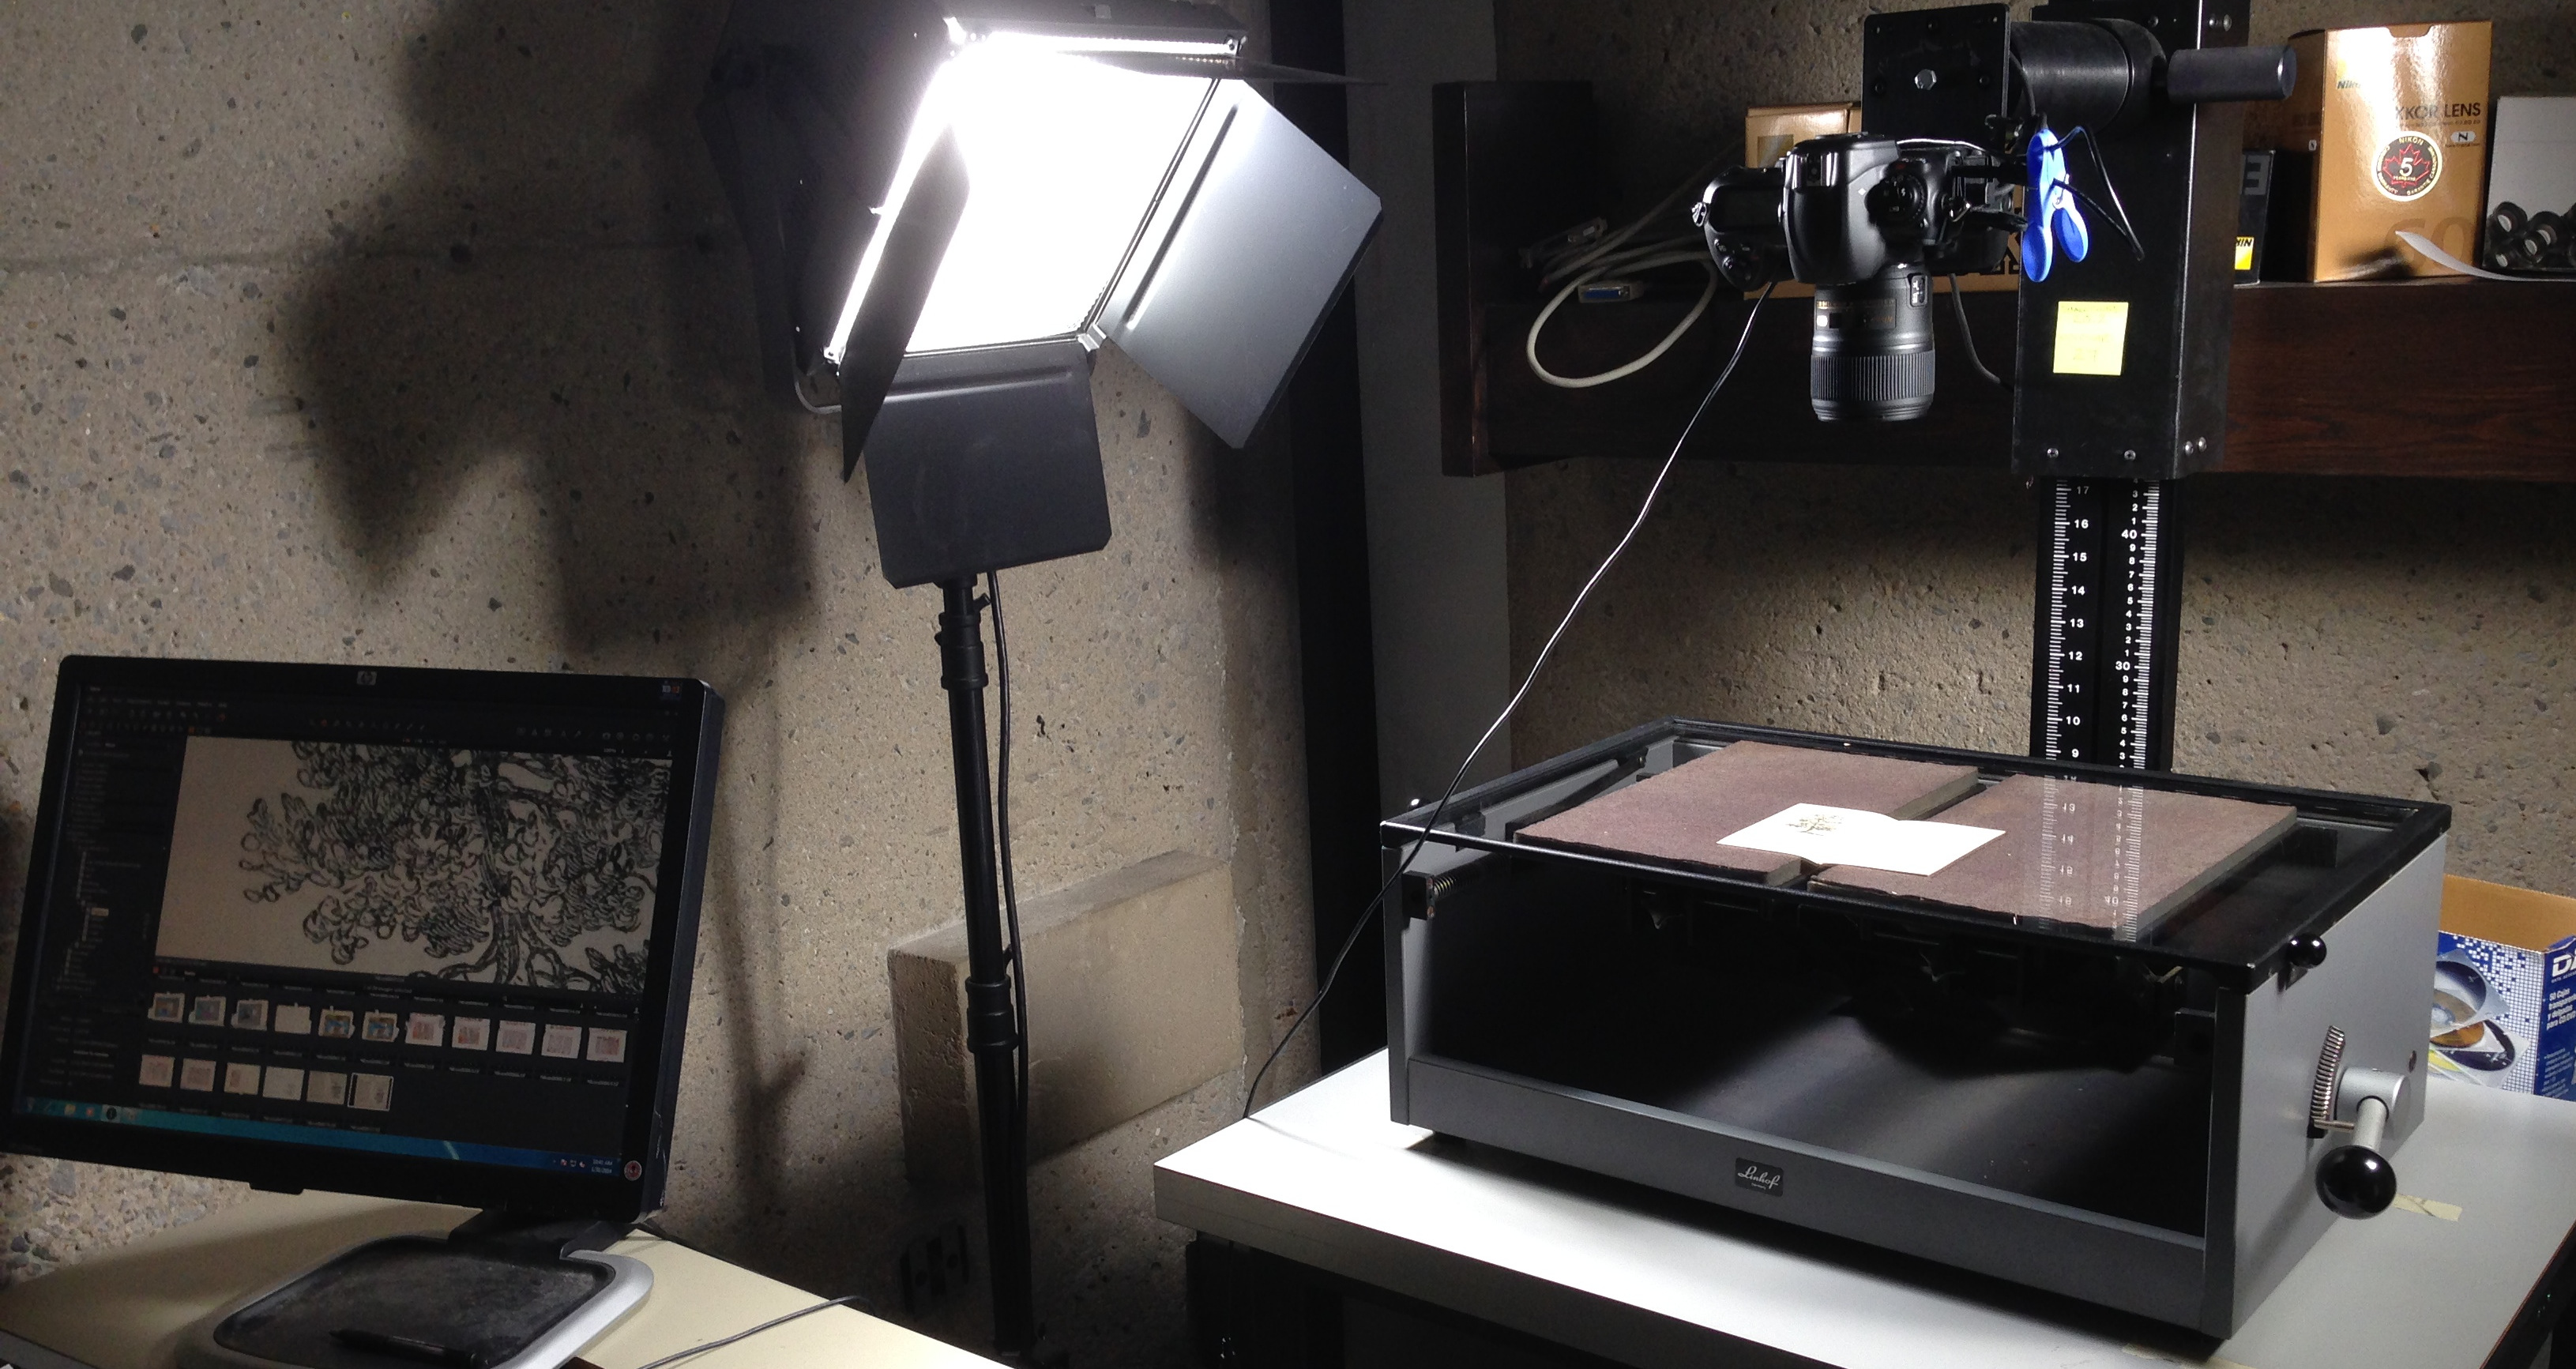 The digital images were prepared in house using a linhof book cradle and a Nikon D3X camera mounted on a camera copy stand.